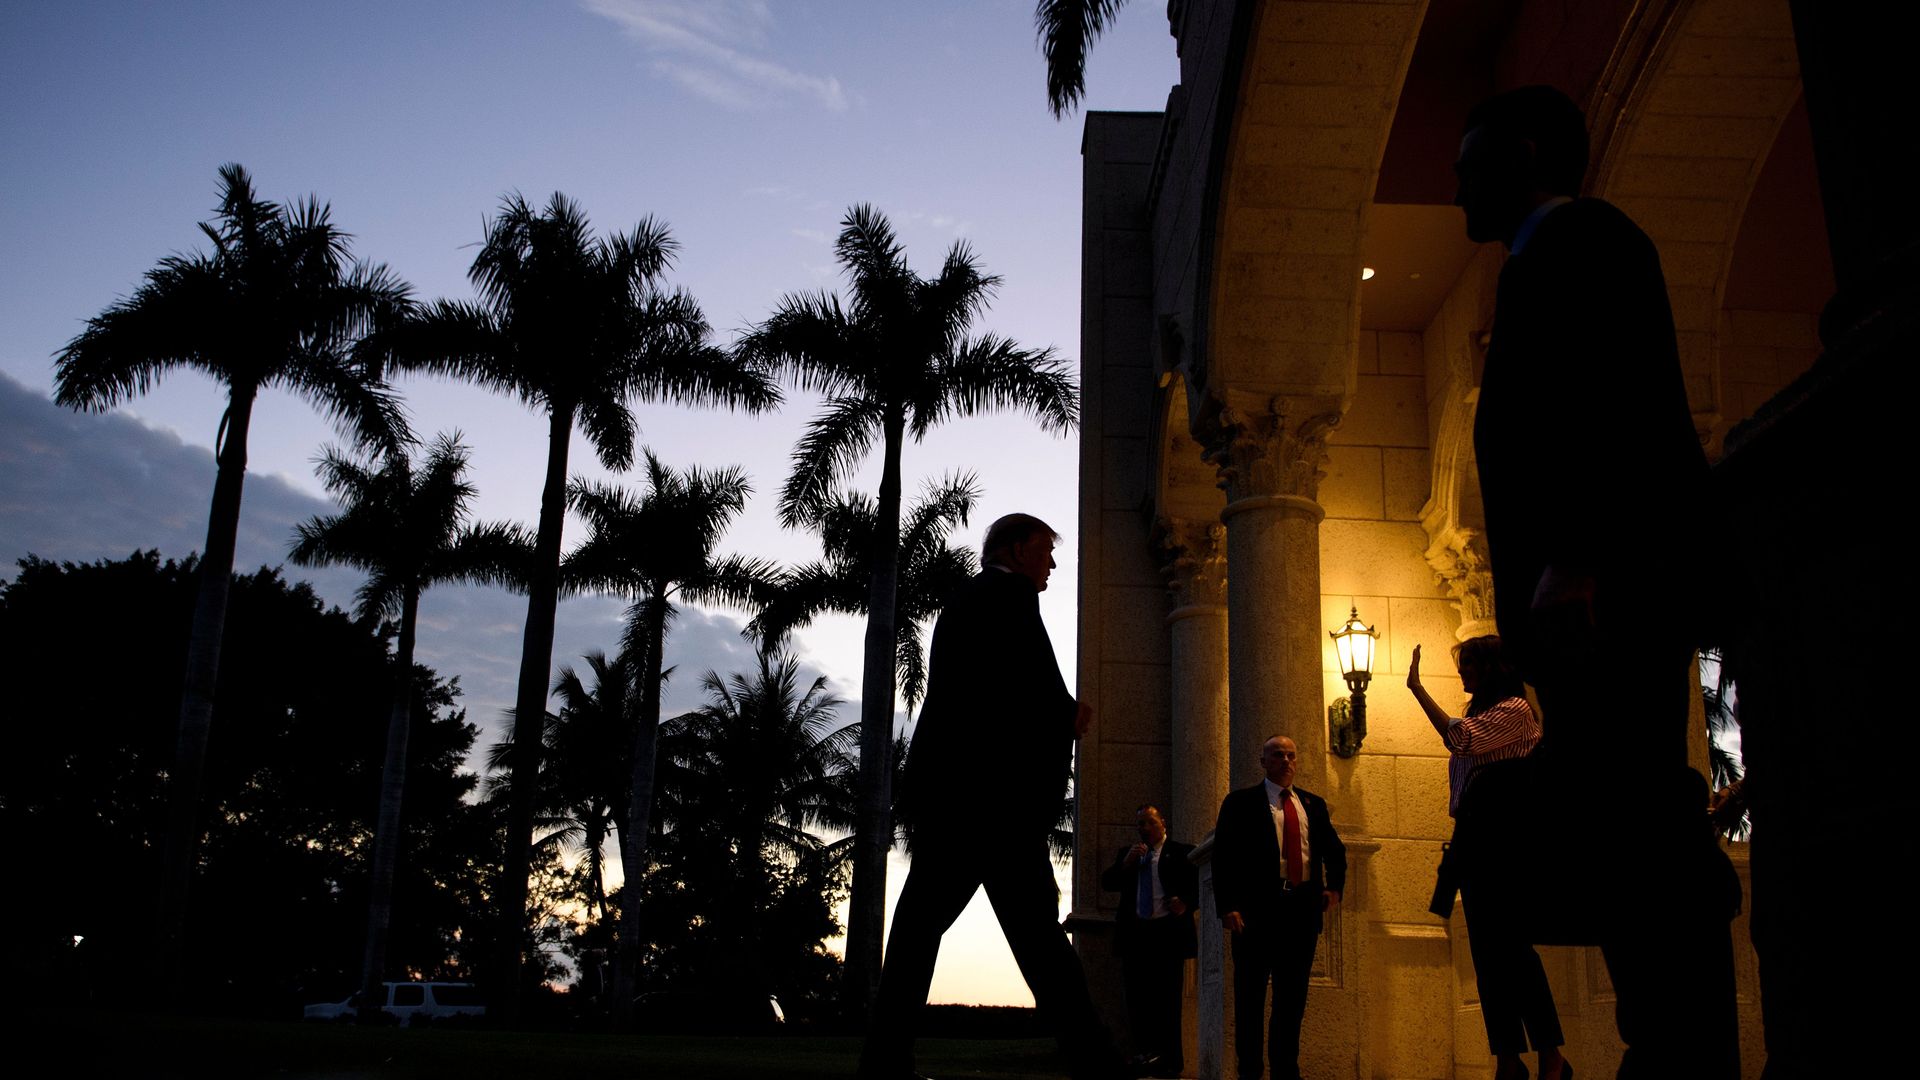 This photo shows Donald Trump walking in Florida, with palm trees in the background as the light fades.